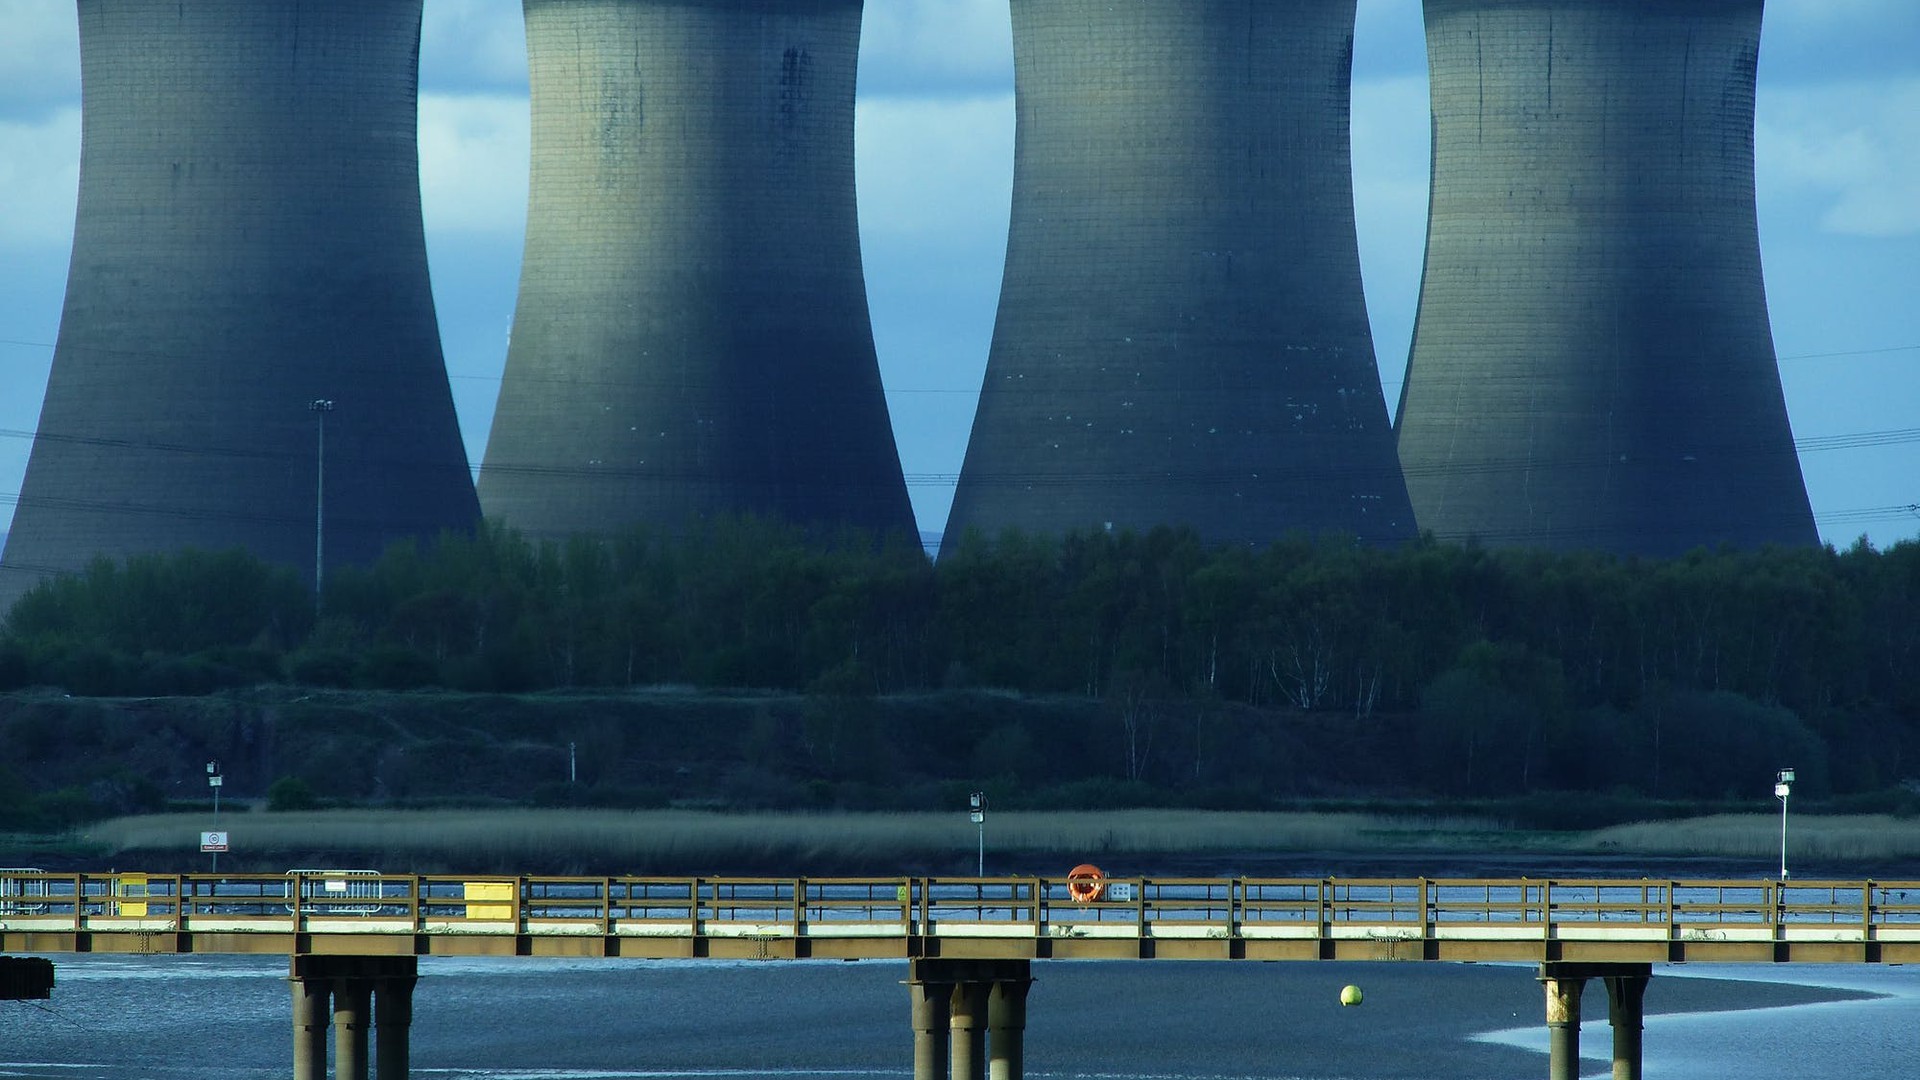 cooling-tower-power-plant-energy-industry-162646.jpeg